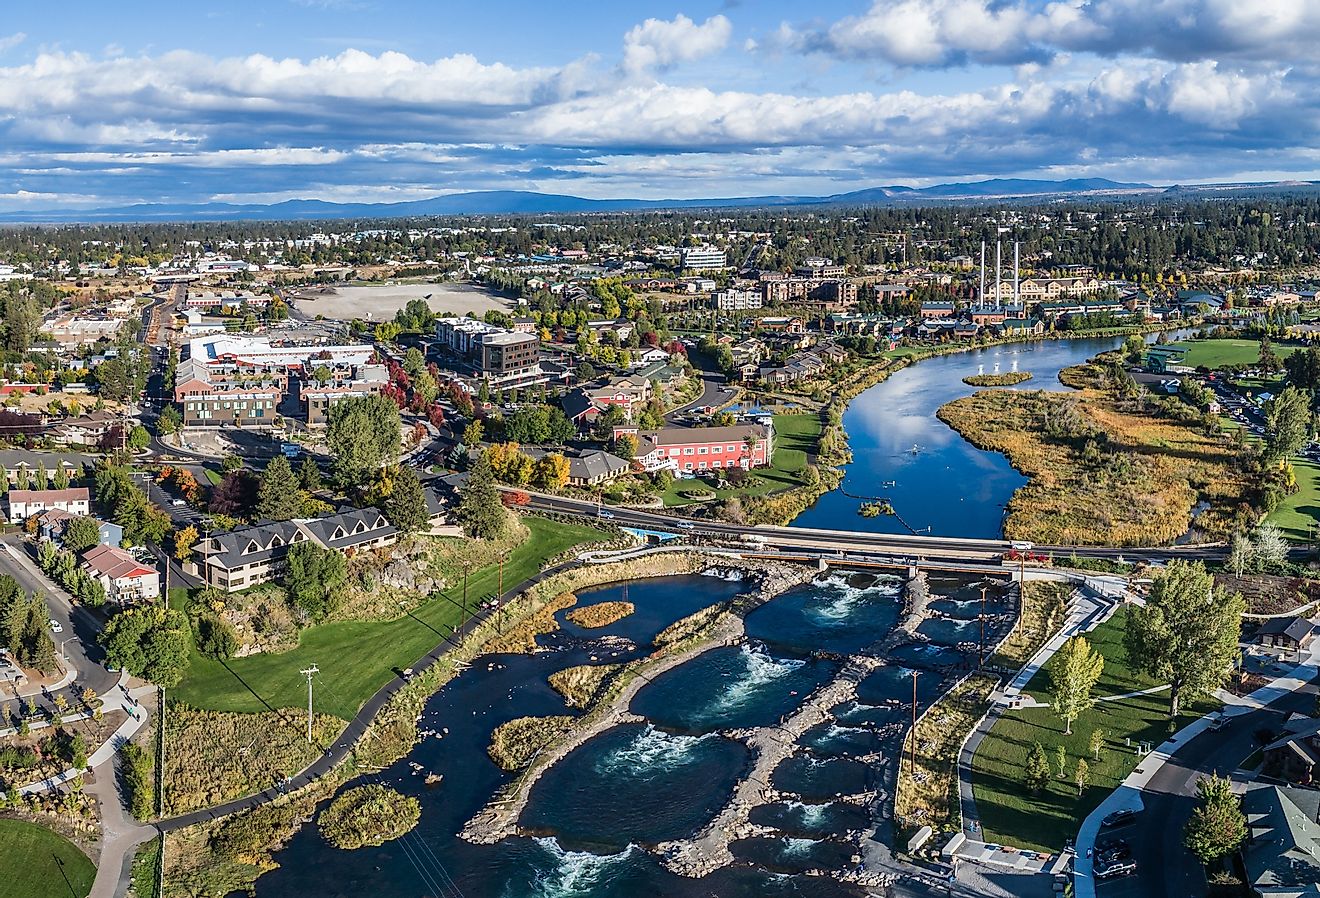 An aerial view of the river and city in Bend, Oregon.